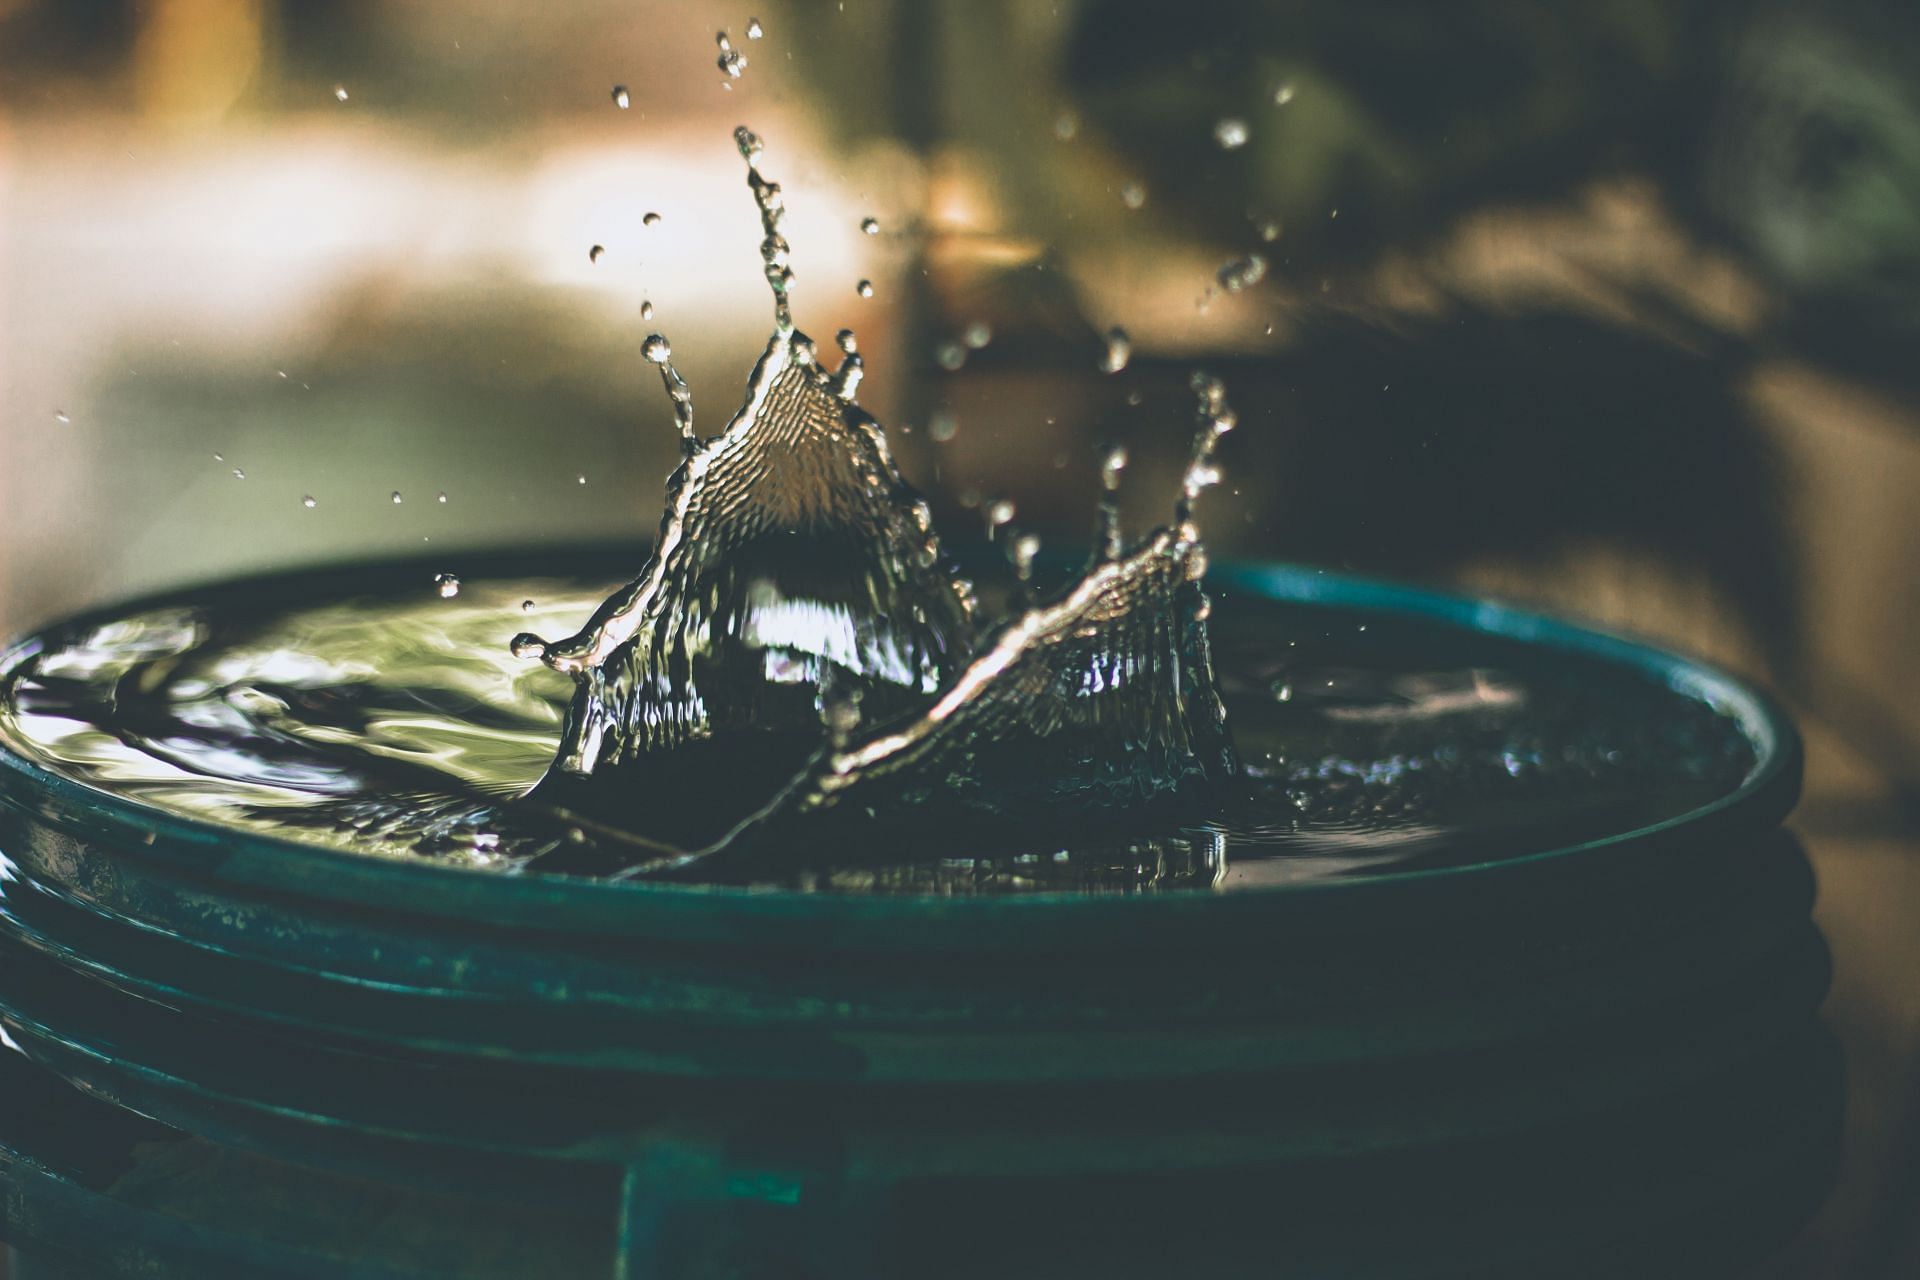 Drinking contaminated water can cause this disease(Image by Amritamshu Sikdar/Unsplash)